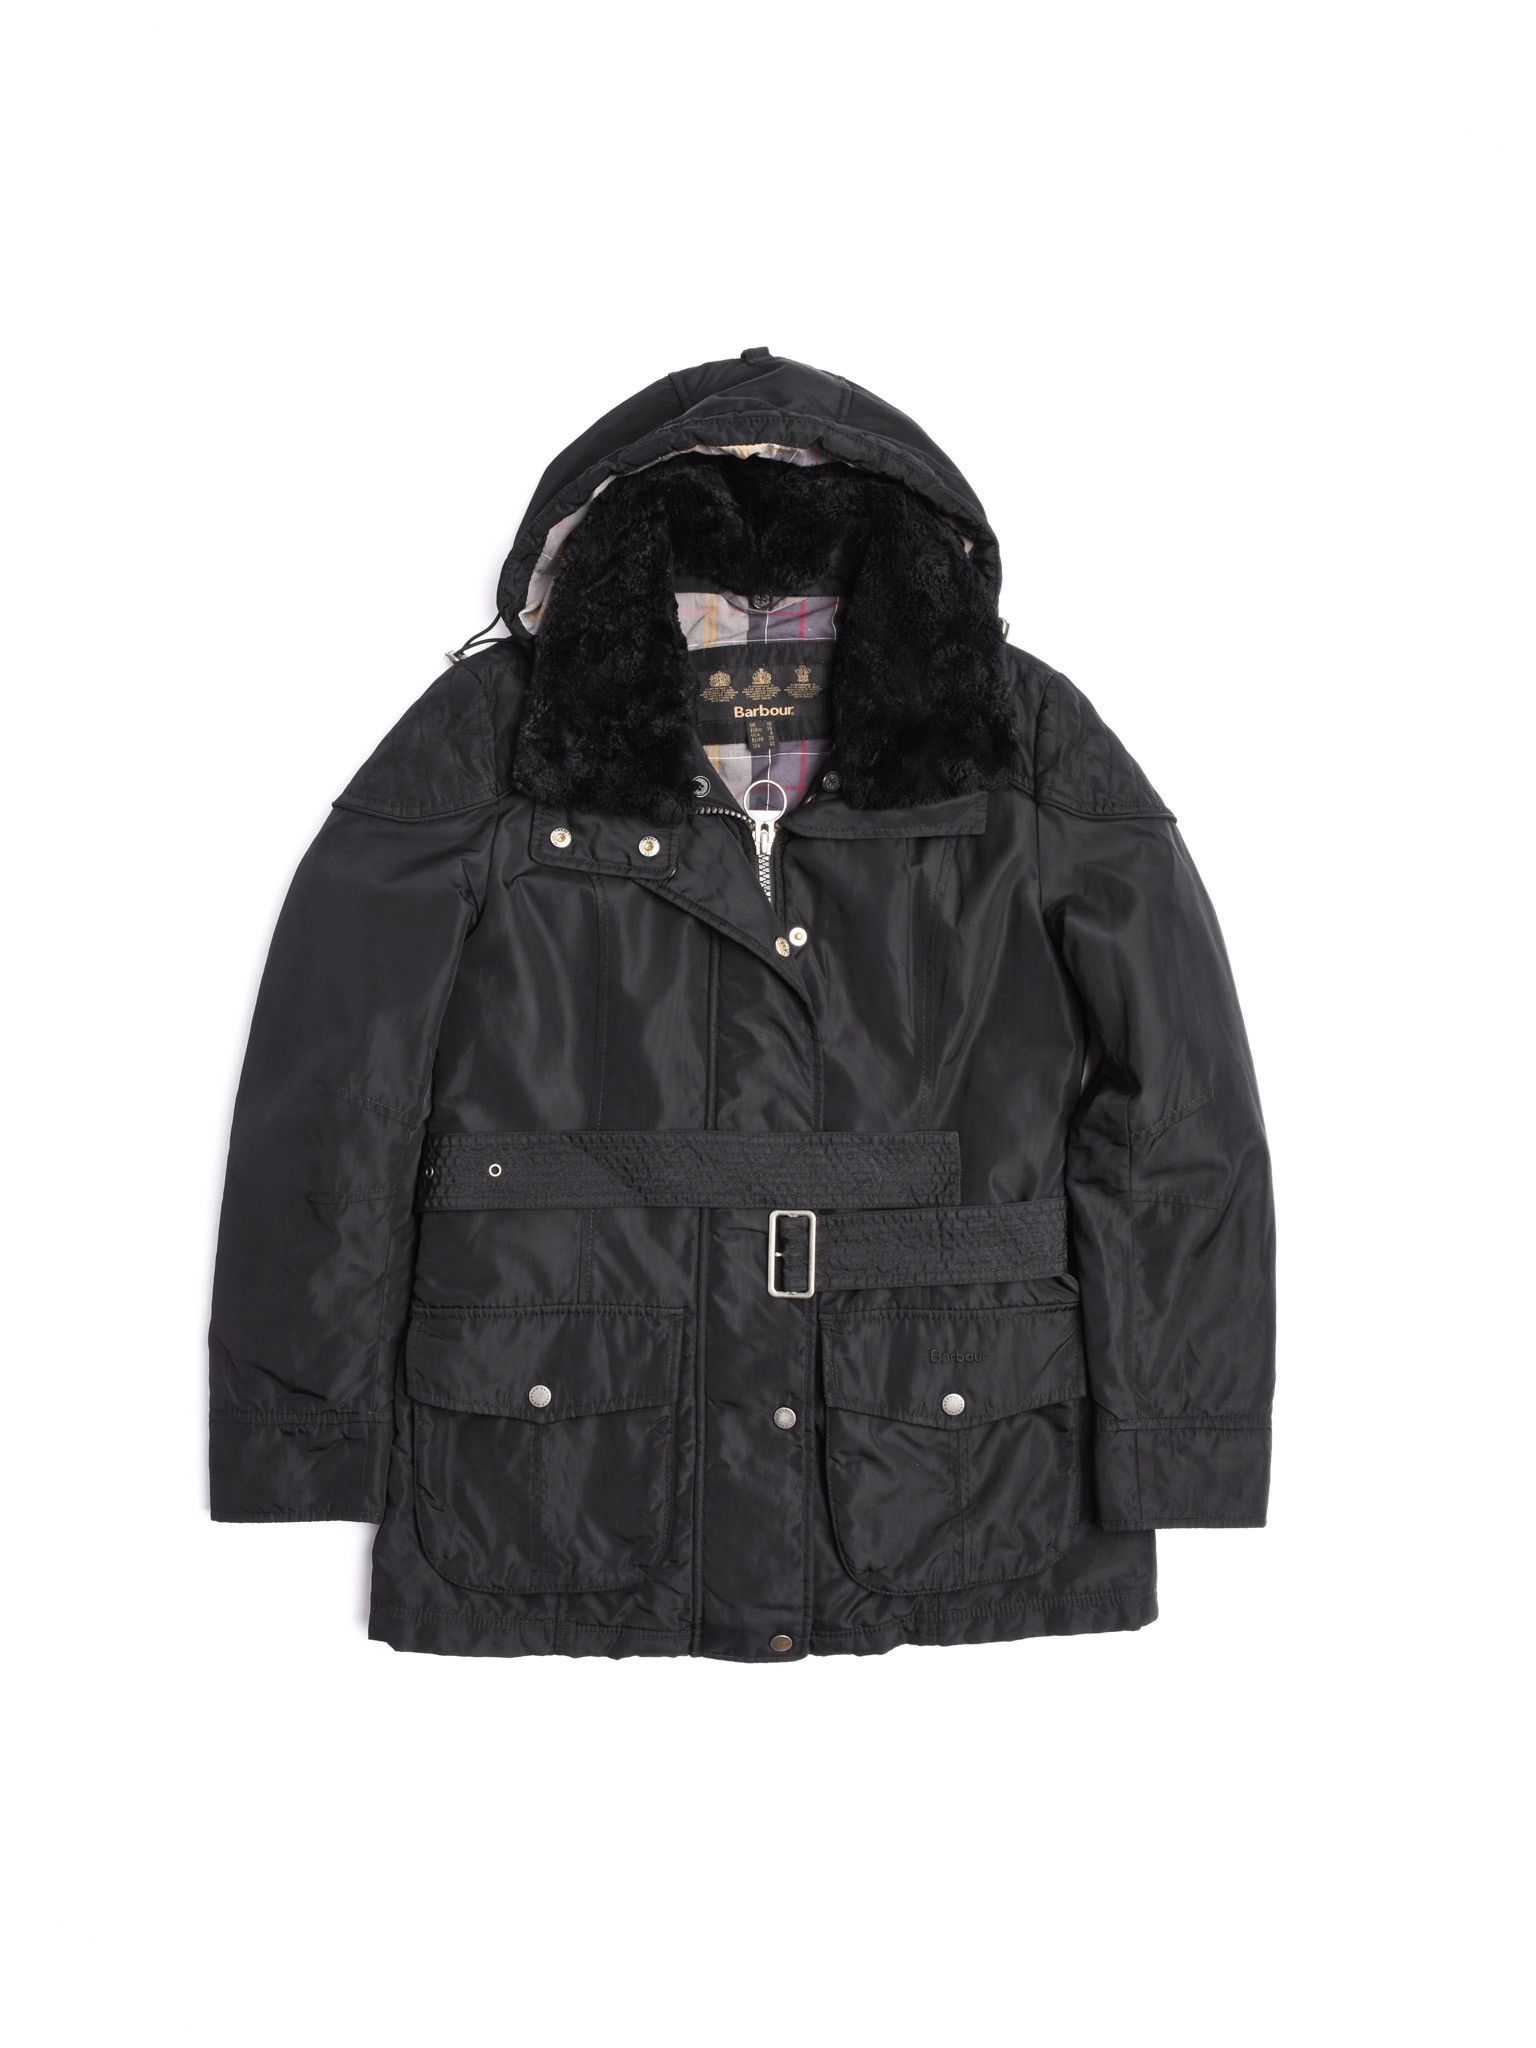 Barbour International Outlaw Shell Jacket